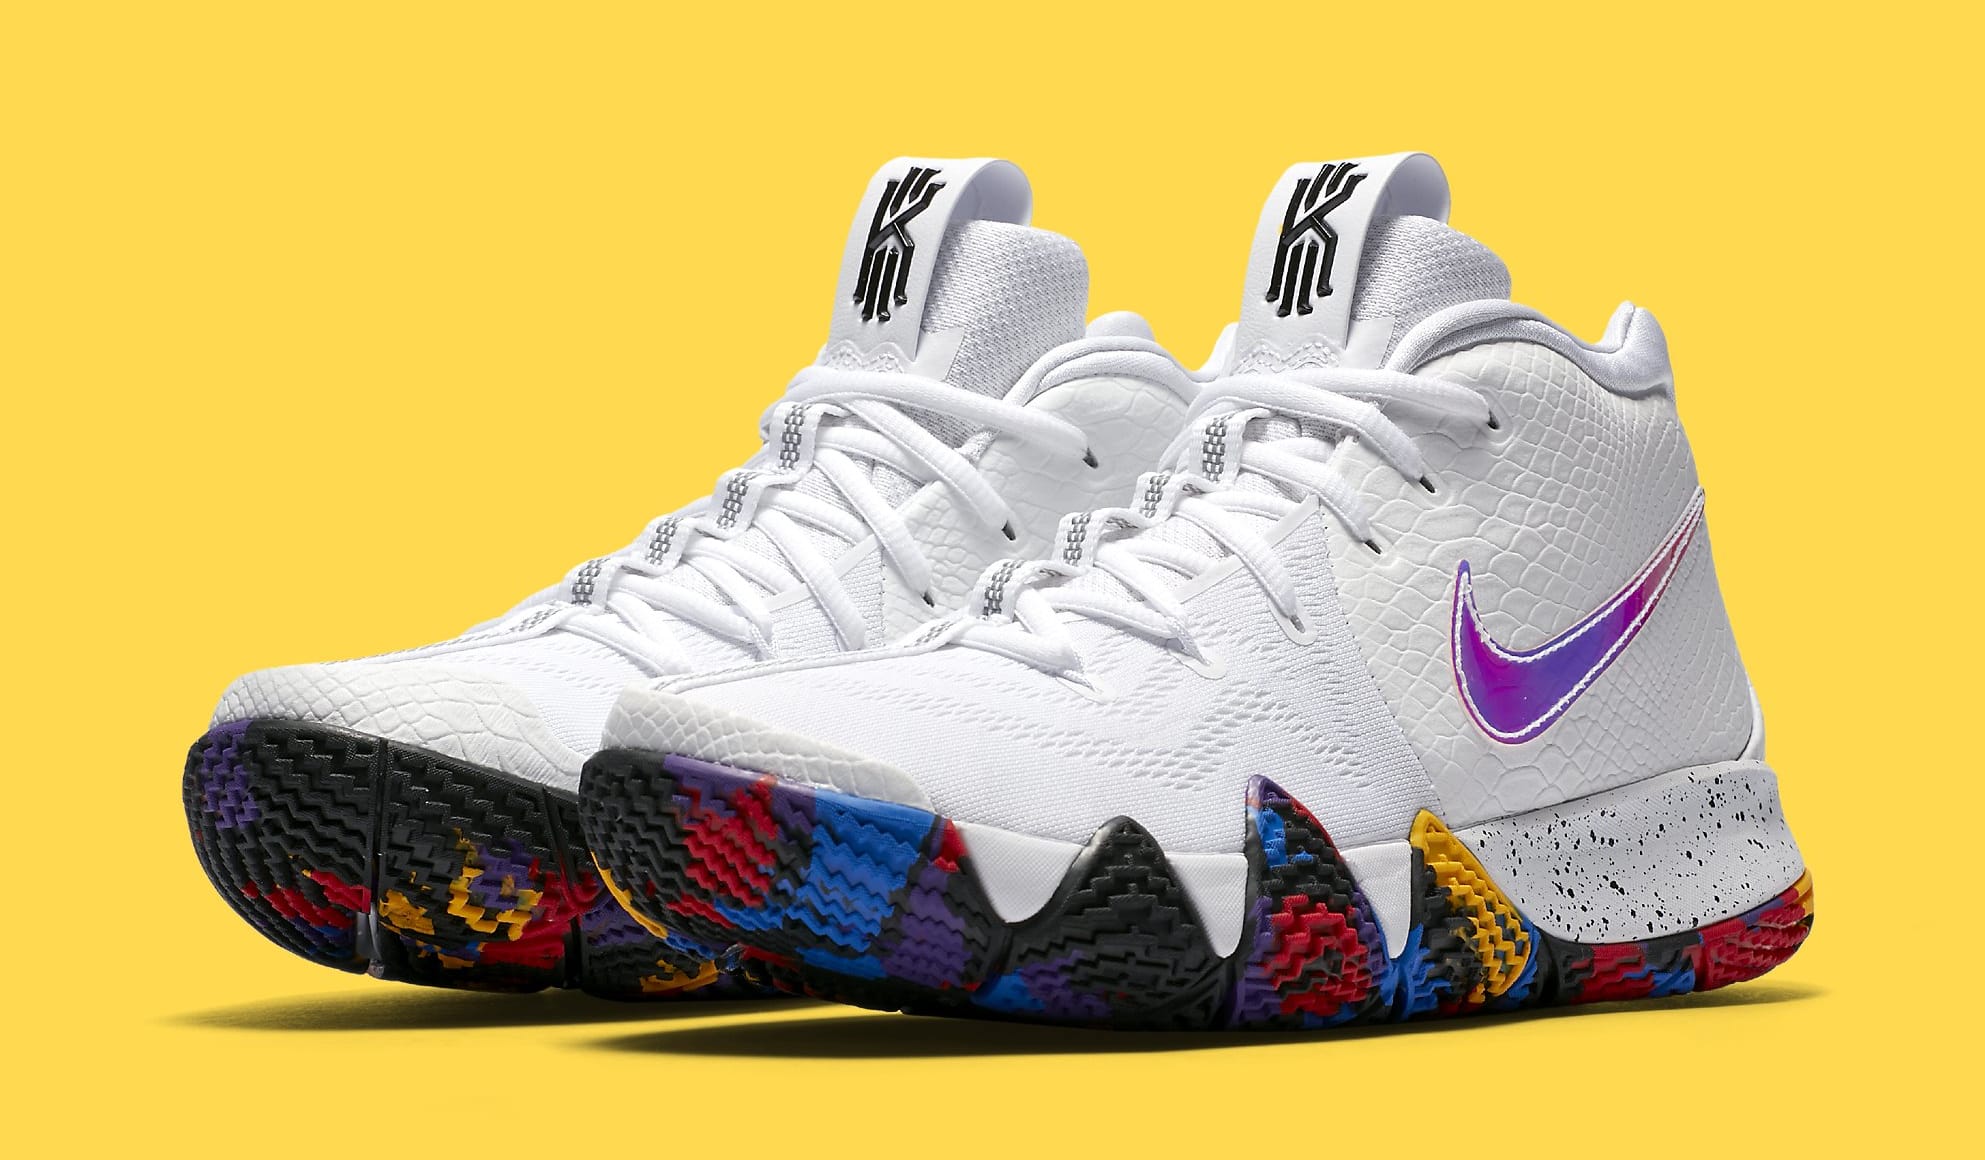 Nike Kyrie 4 &#x27;March Madness&#x27; 943804-104 (Pair)